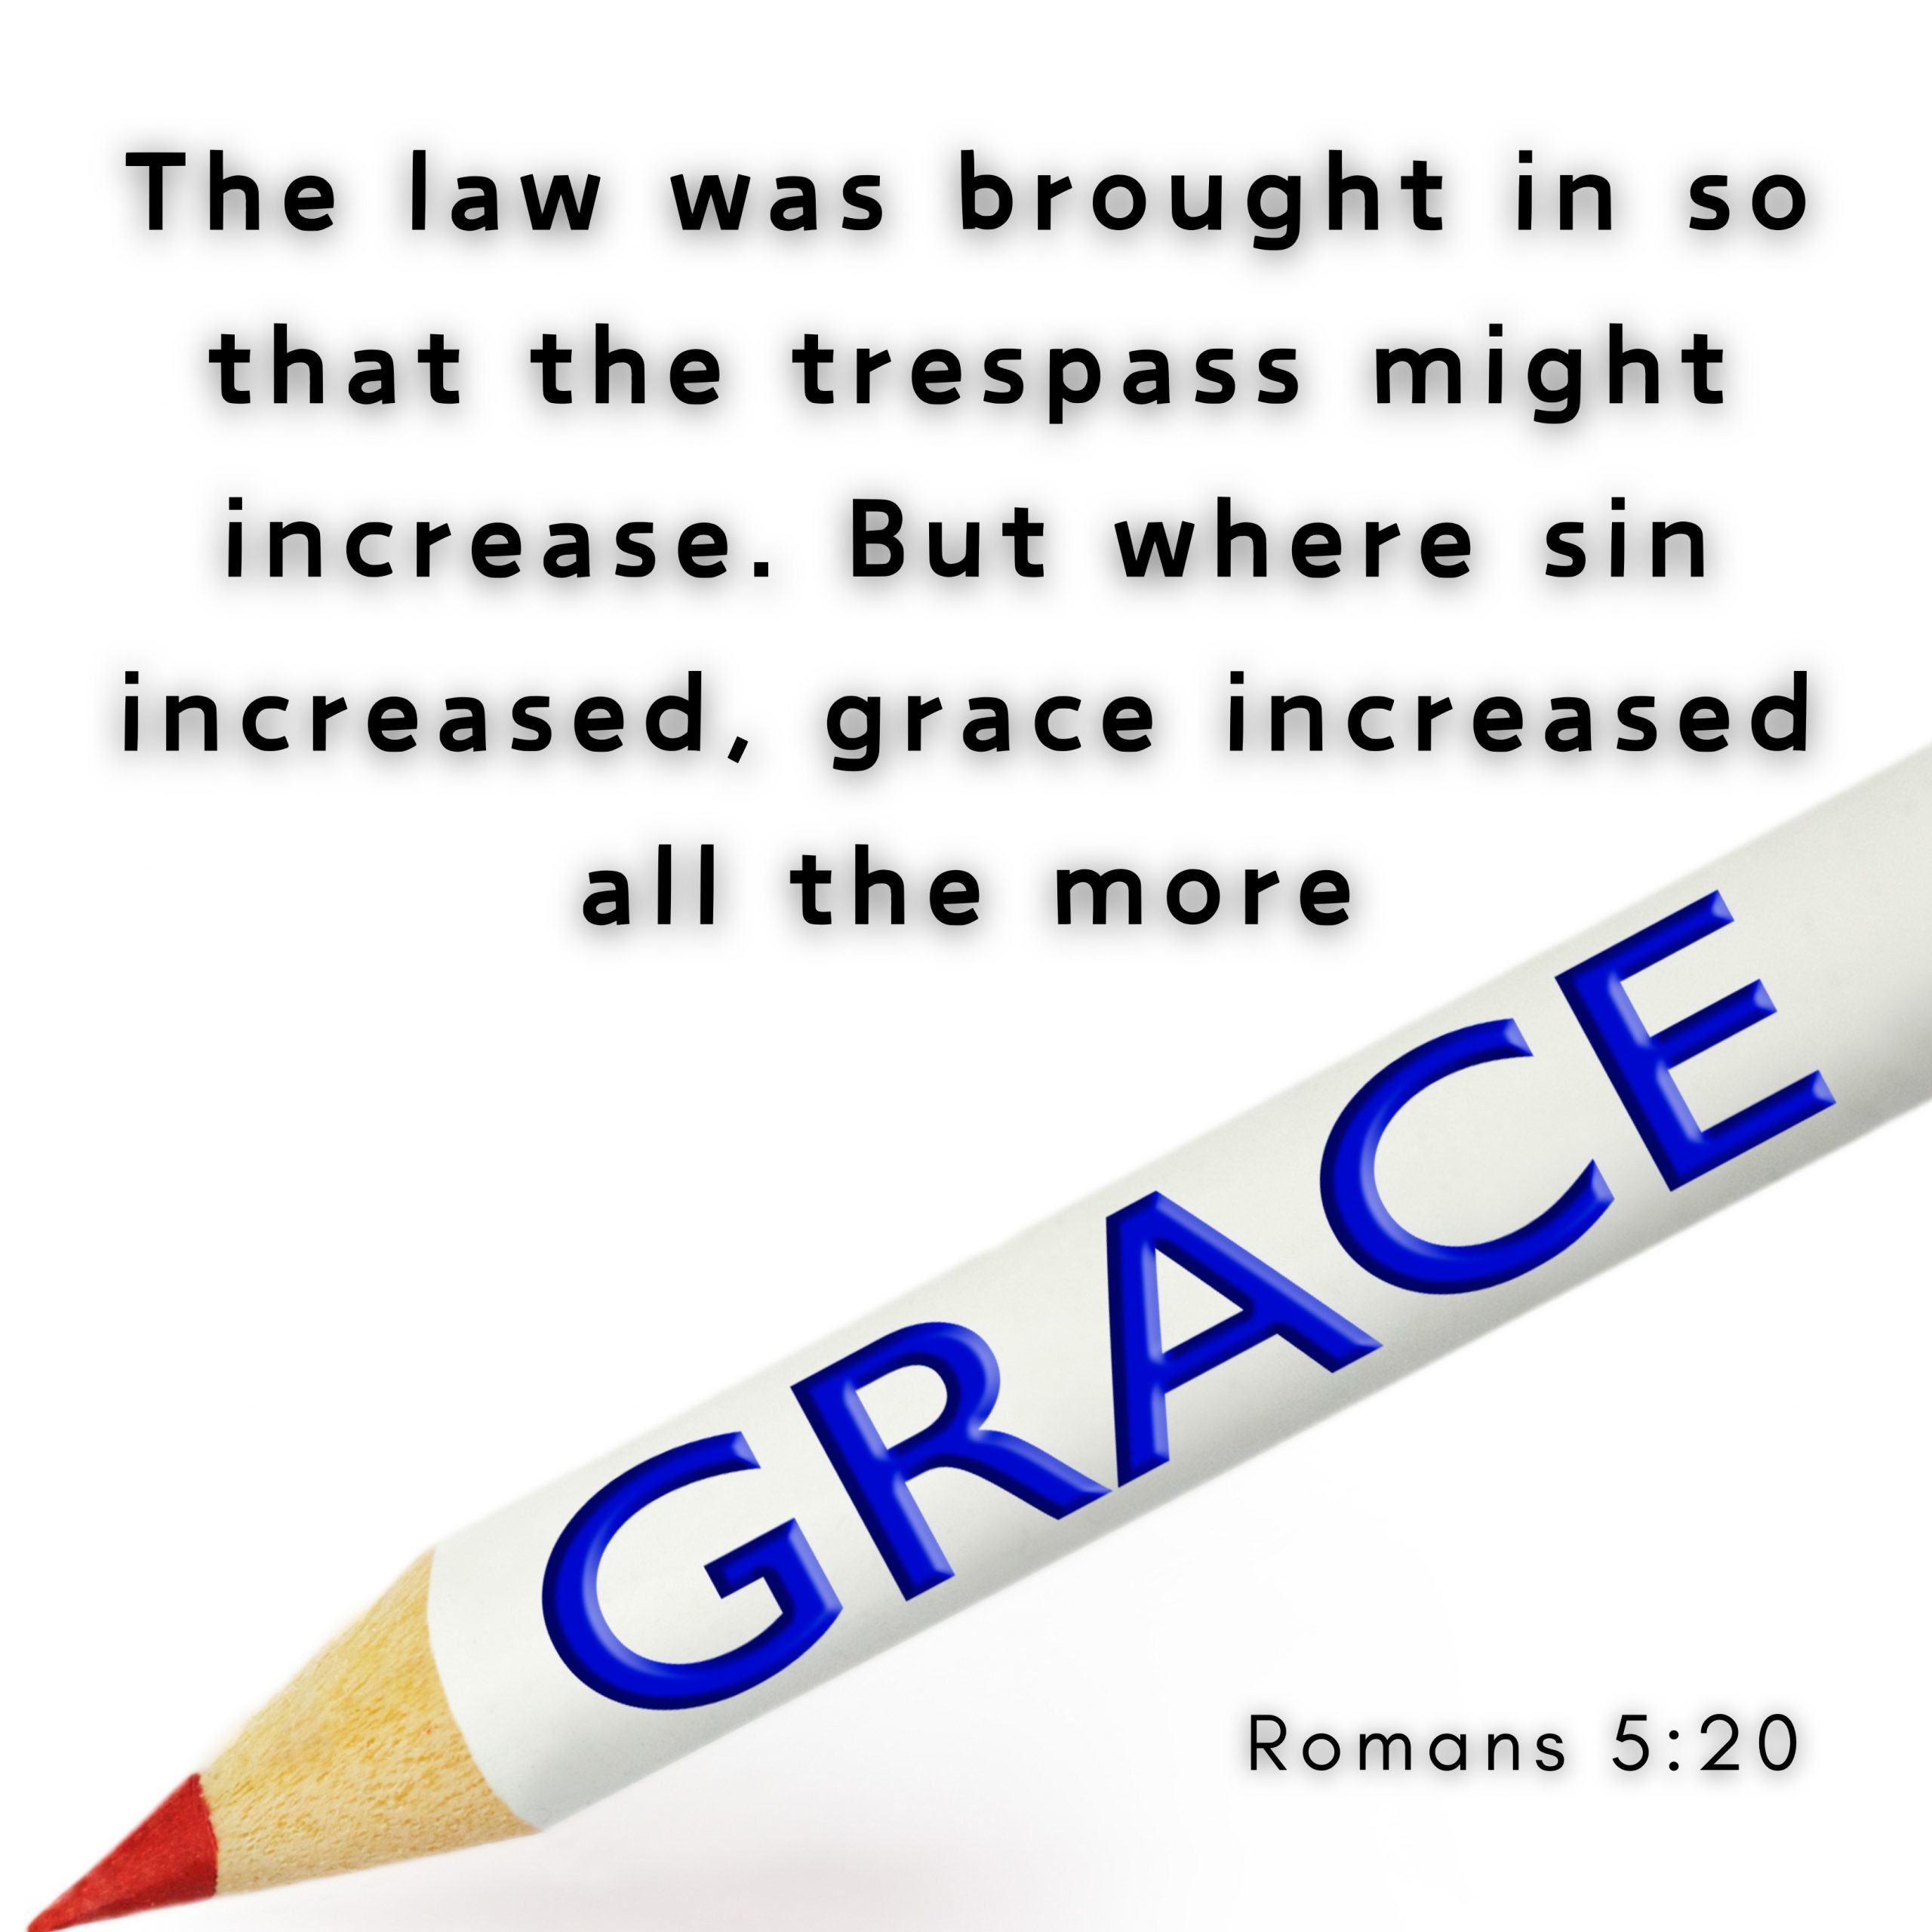 Grace Abounds All the More